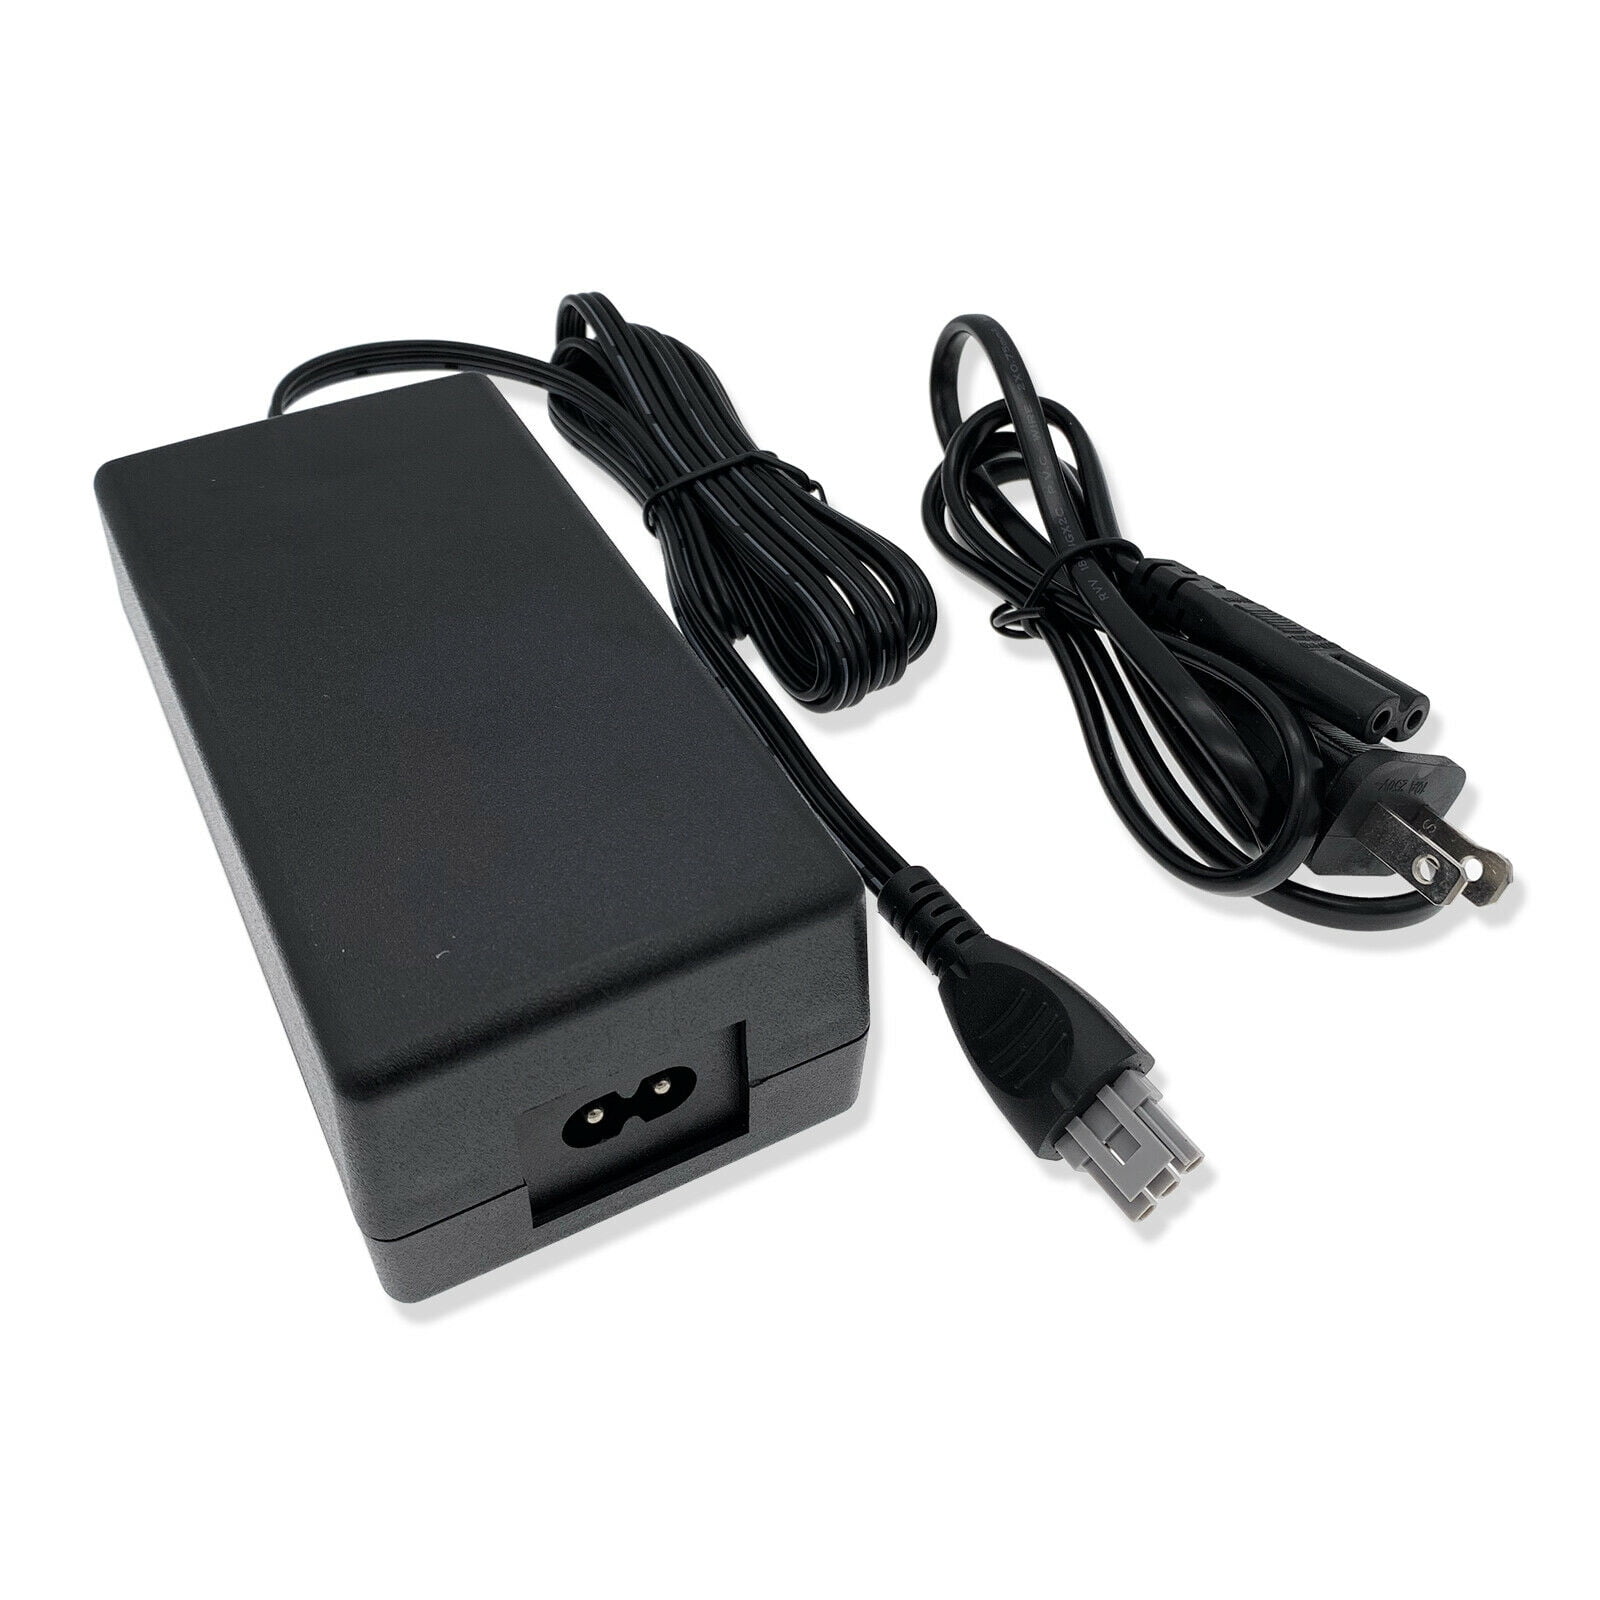 Power Adapter Charger Supply Cord For HP DeskJet F4150 F2180 F2128 Printer - Walmart.com